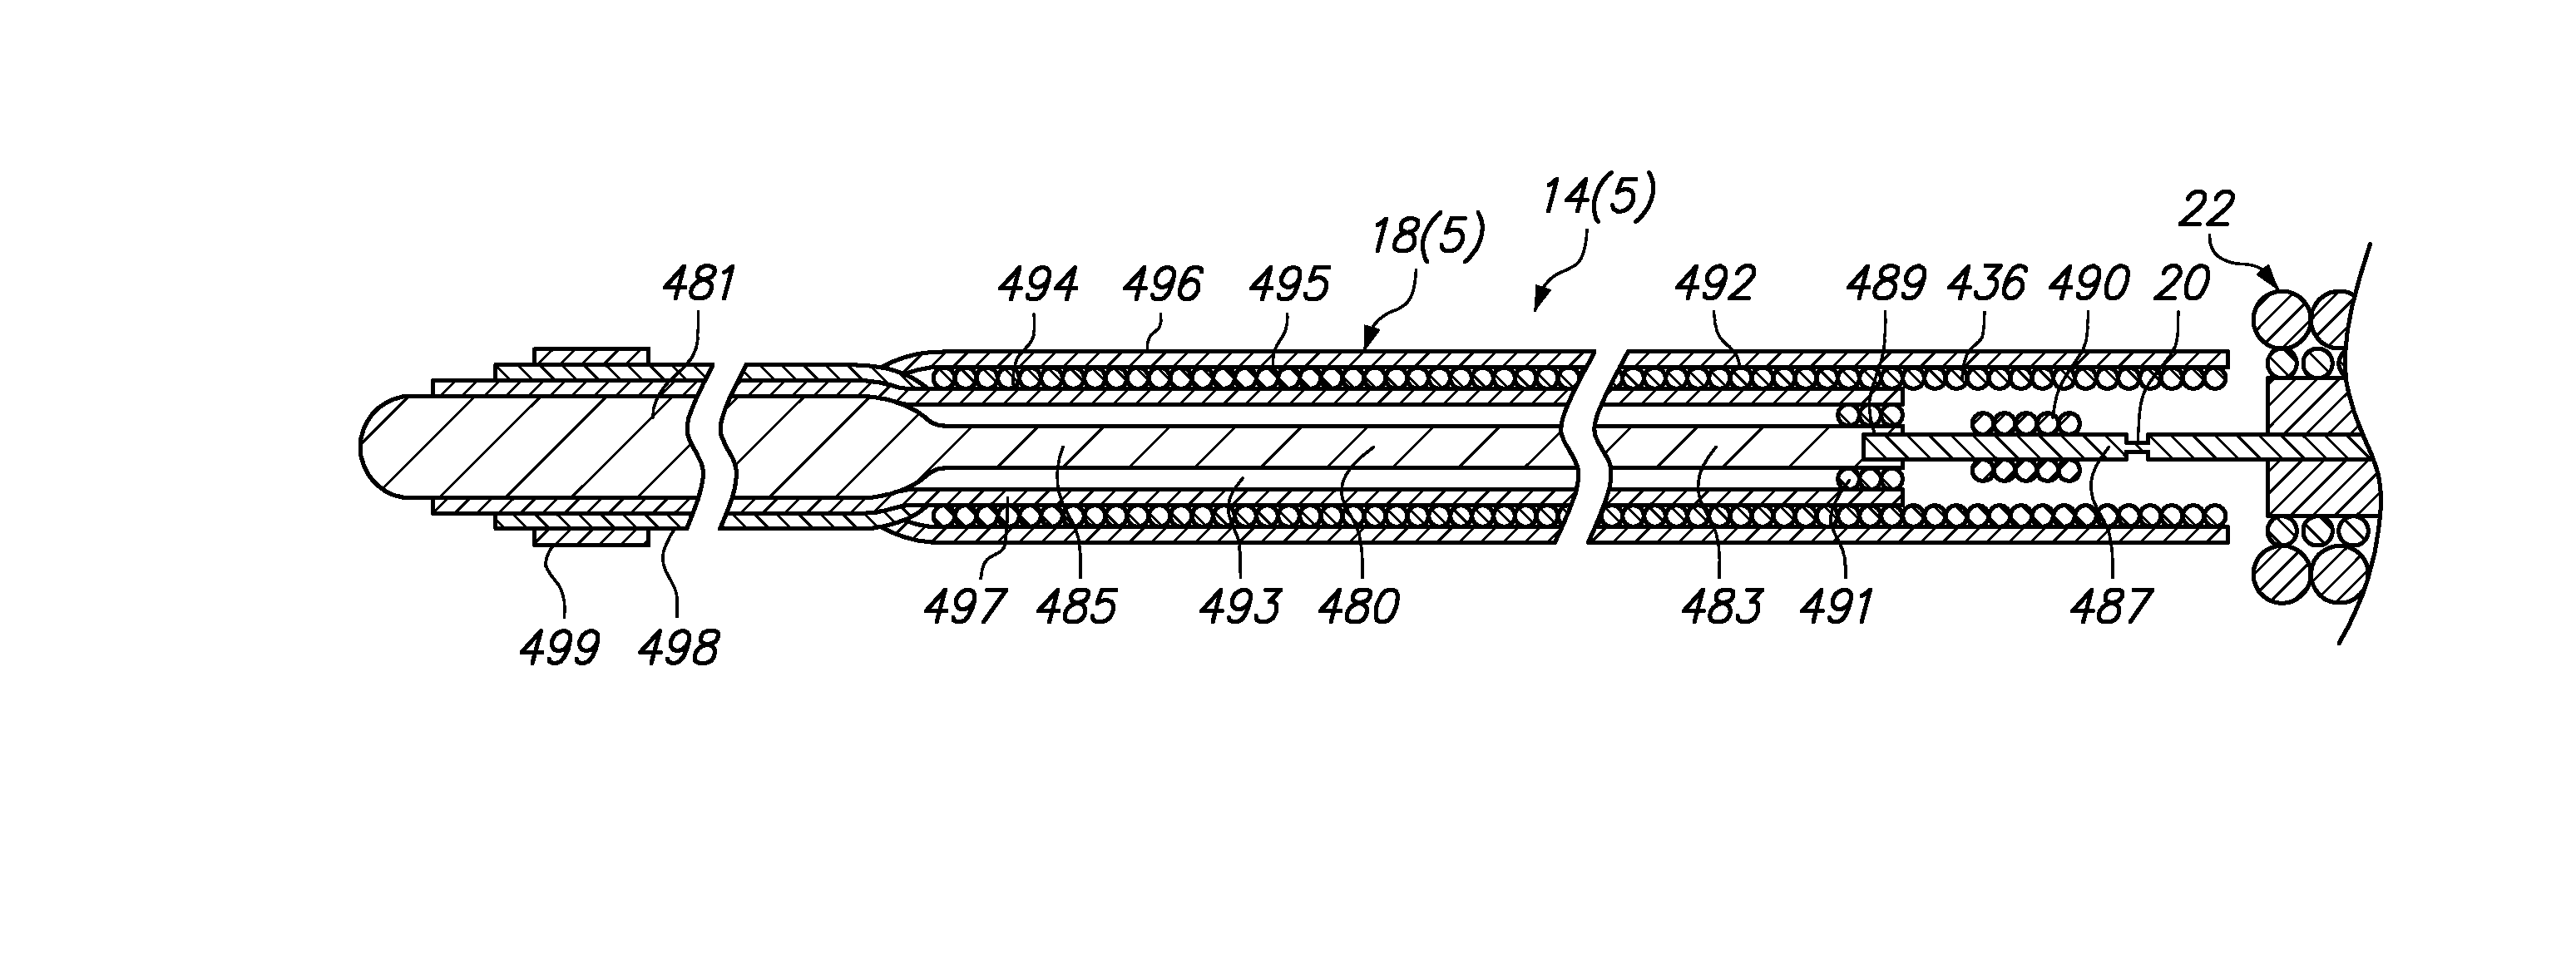 Medical implant detachment systems and methods